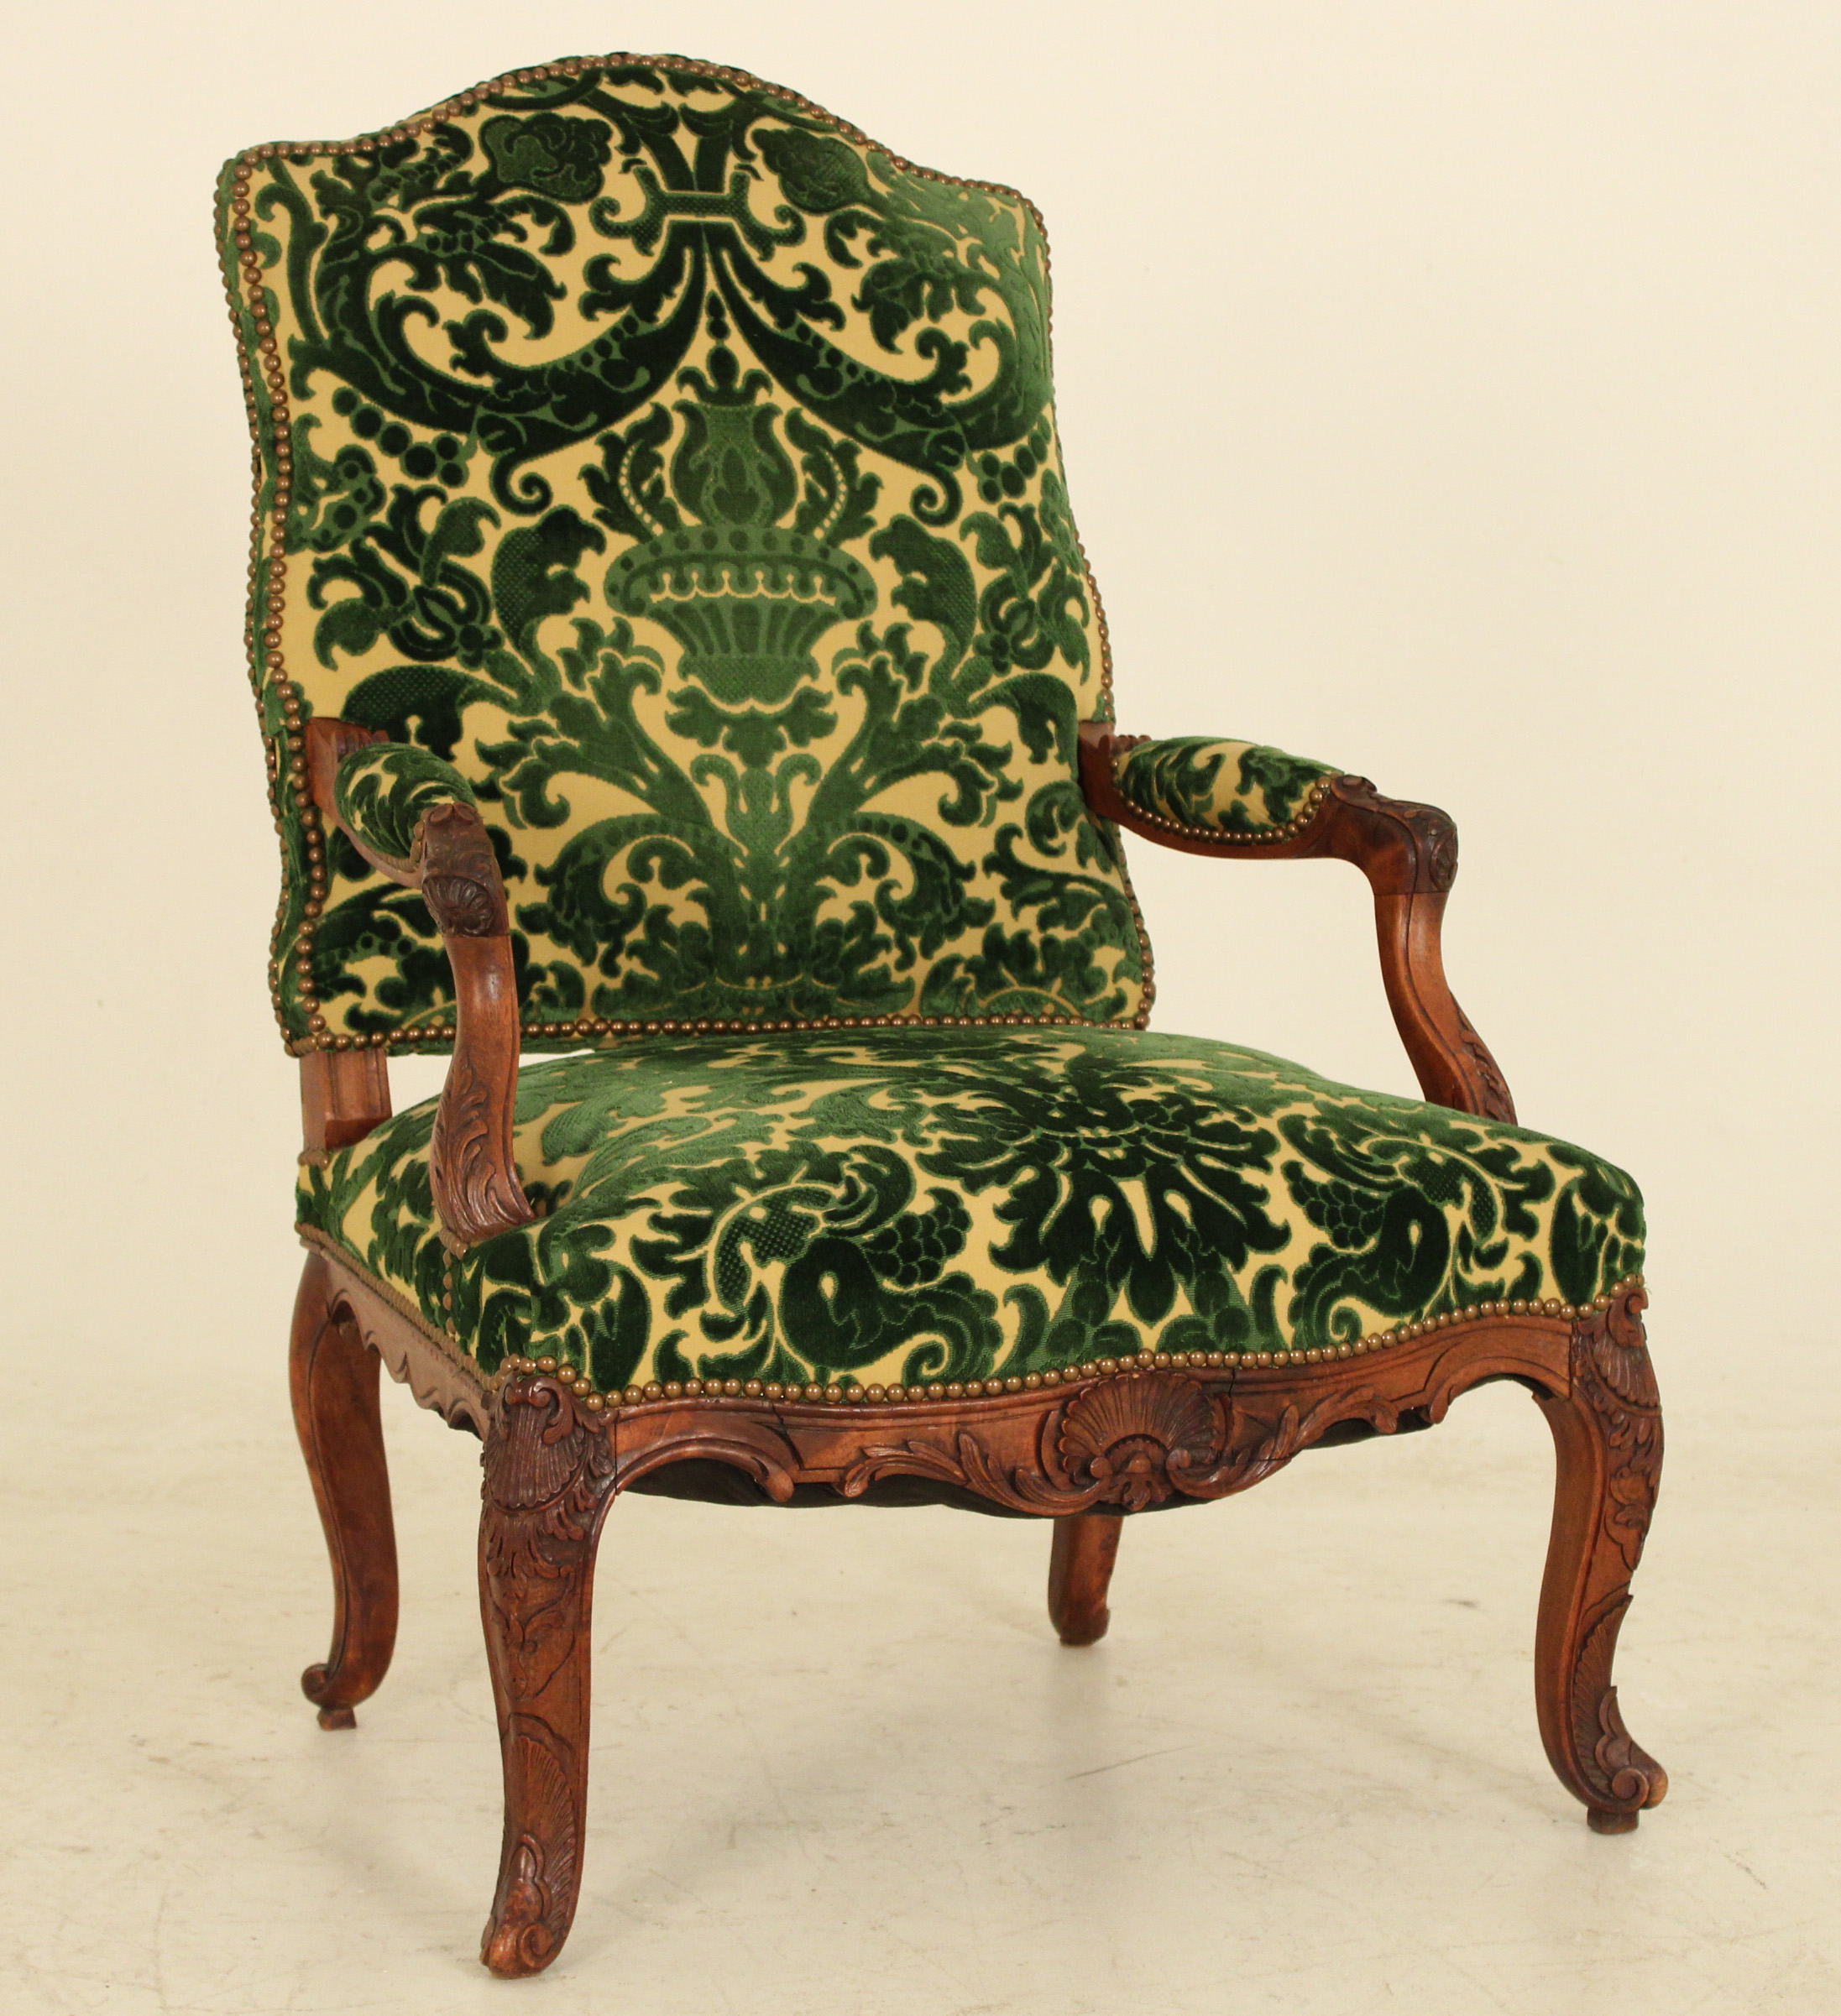 LOUIS XV CARVED WALNUT FAUTEUIL